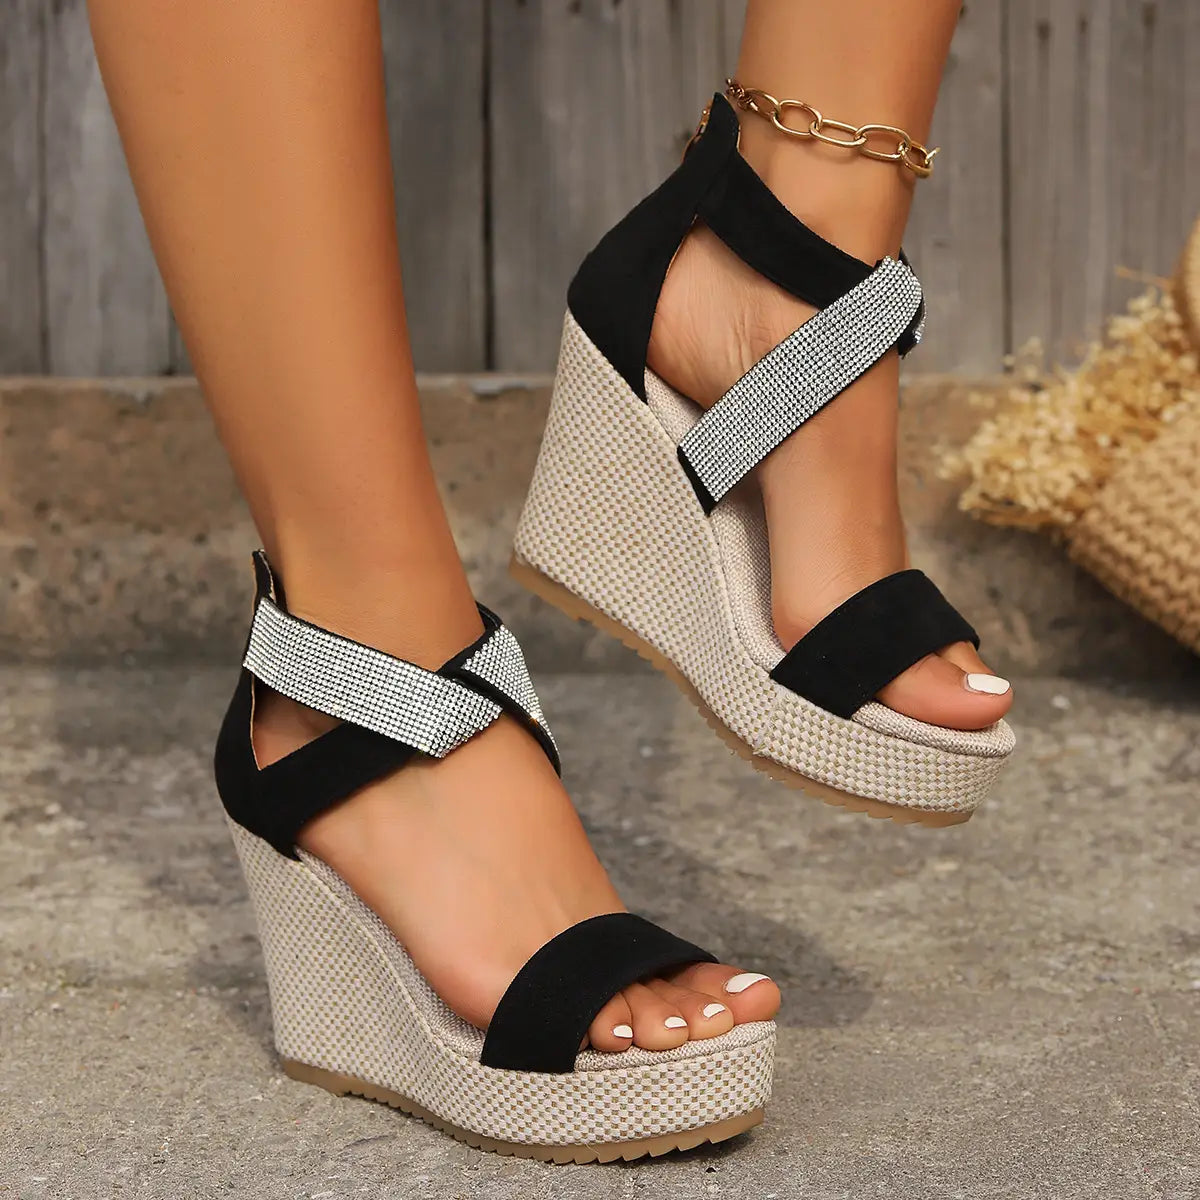 Ladies Open Toe High Wedge Sandals With Rhinestone Detail